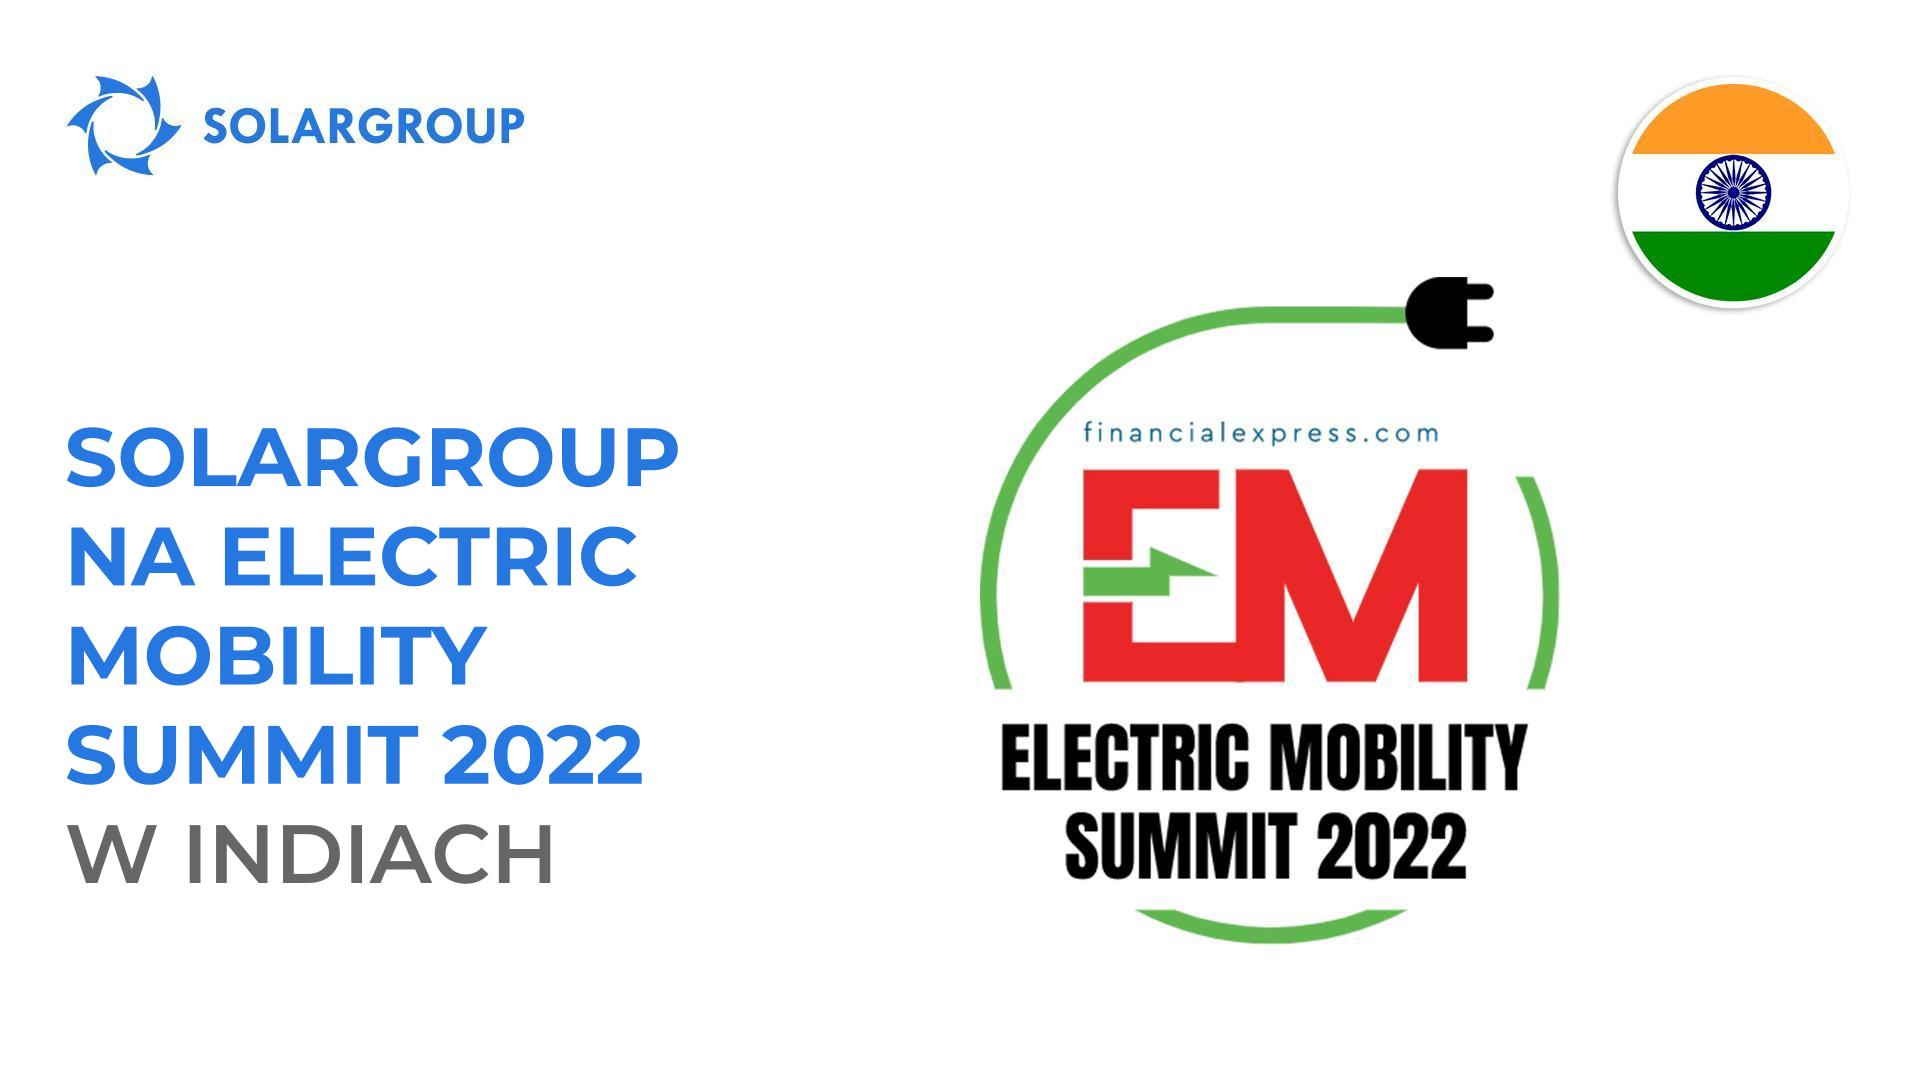 SOLARGROUP na Electric Mobility Summit 2022 w Indiach